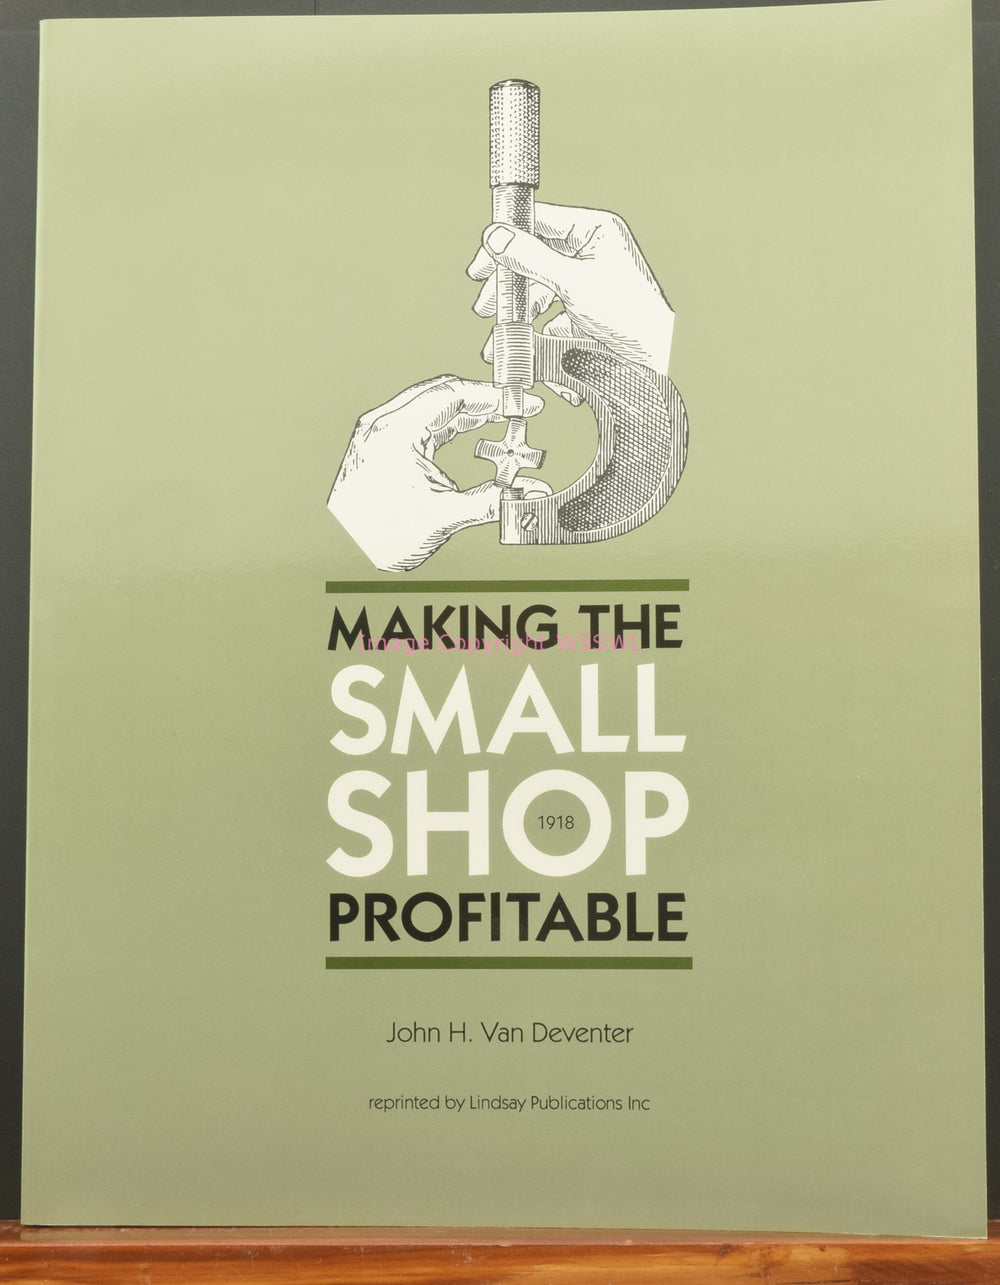 Making The Small Shop Profitable by John H Van Deventer - Dave's Hobby Shop by W5SWL